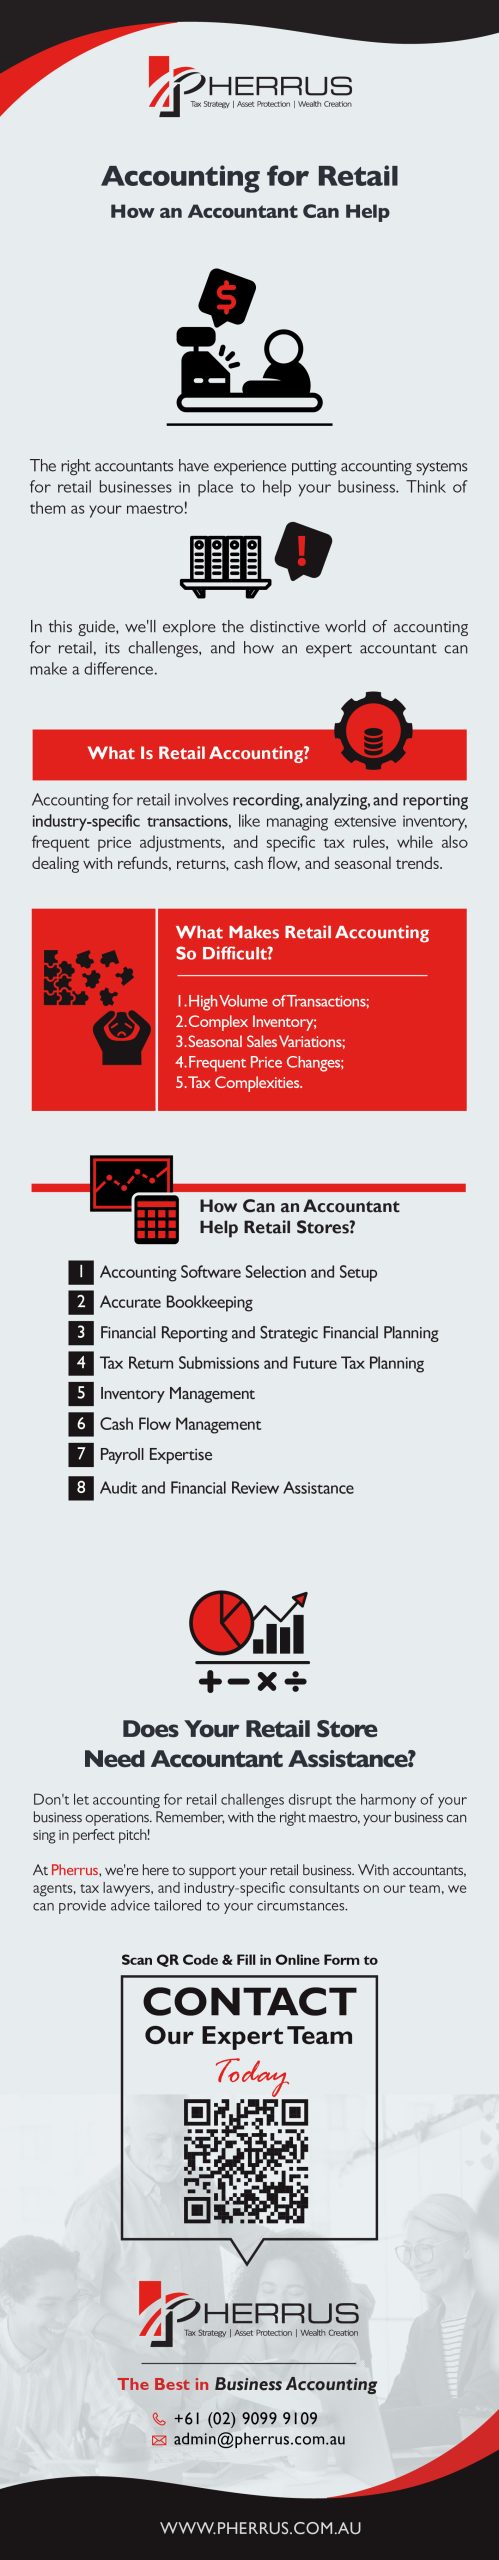 Accounting for Retail - How an Accountant Can Help Infographic